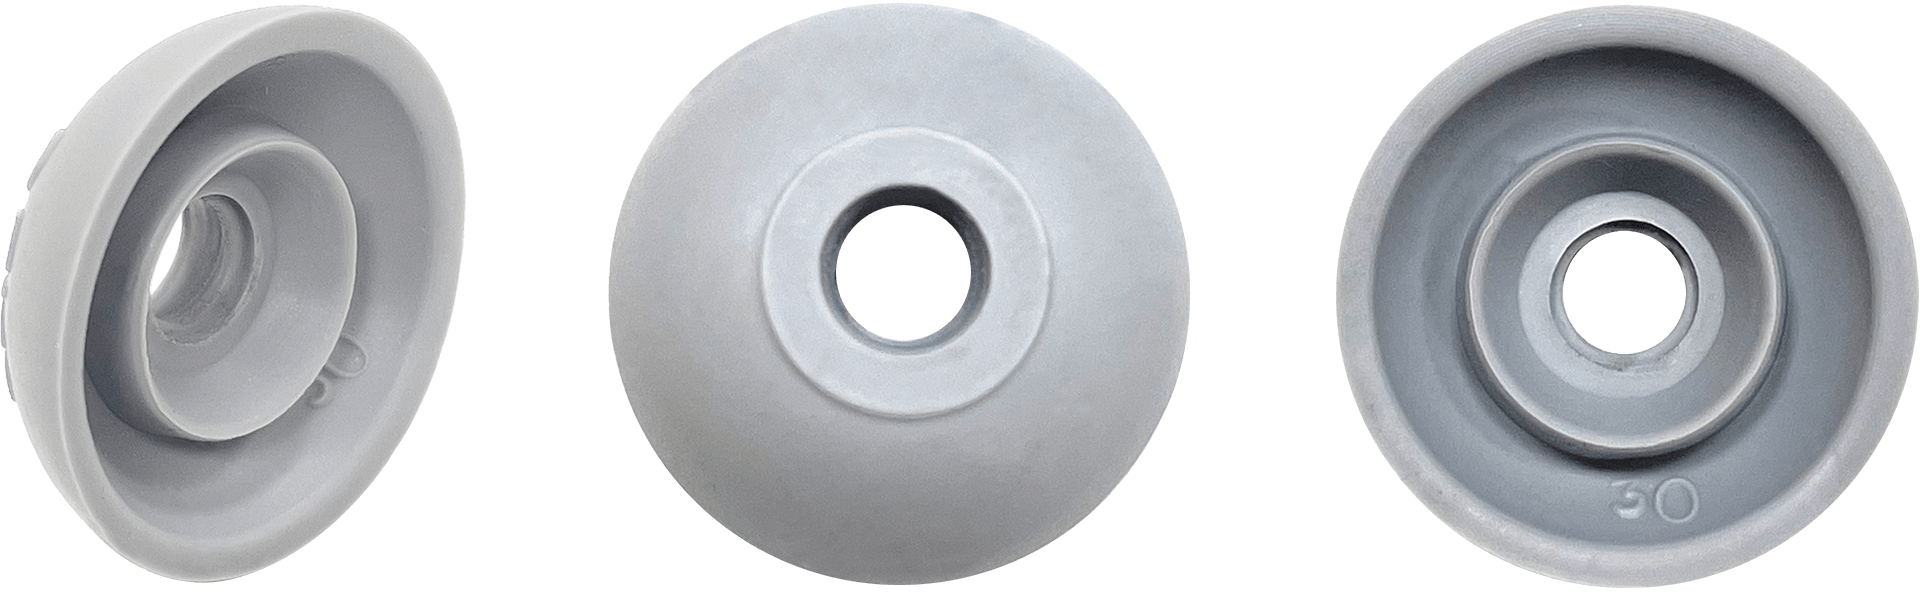 25mm Domed Weatherseal EPDM washer